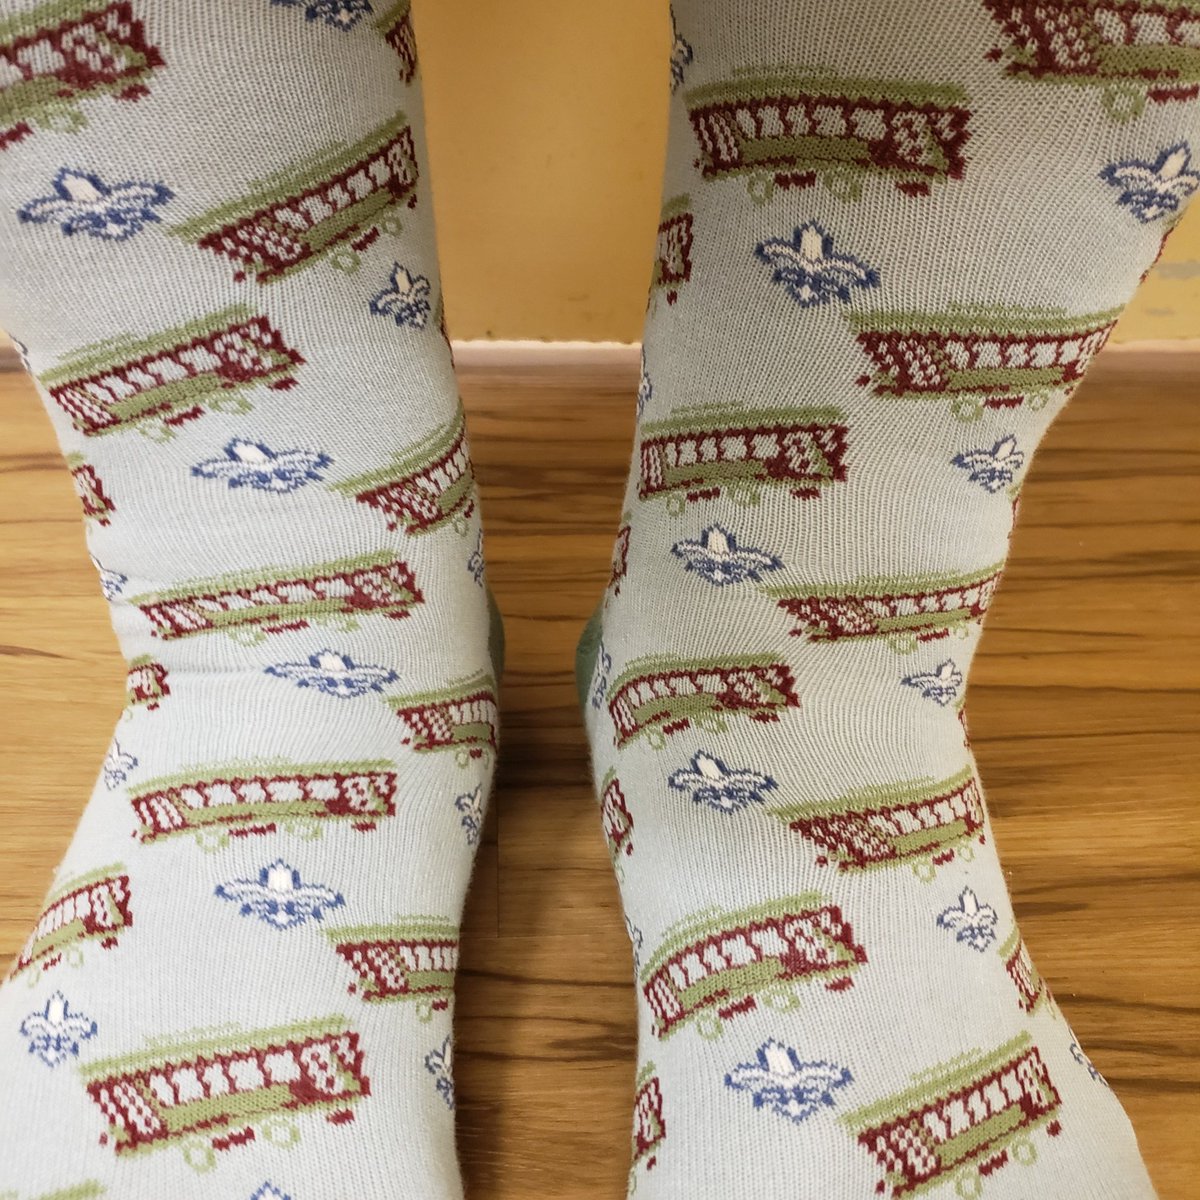 Good morning, Twitter.  In celebration of the Mardi Gras season, I'm letting the good times roll with some New Orleans streetcar socks!  #LaissezLesBonsTempsRouler